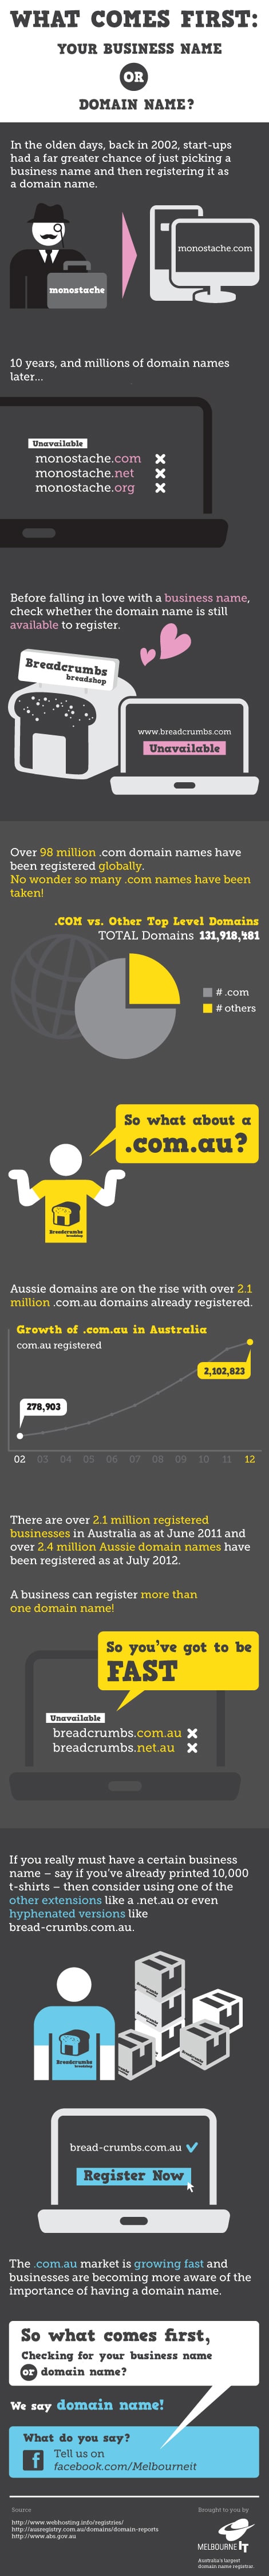 Choose Wisely: Company Name Or Domain Name First? [Infographic]